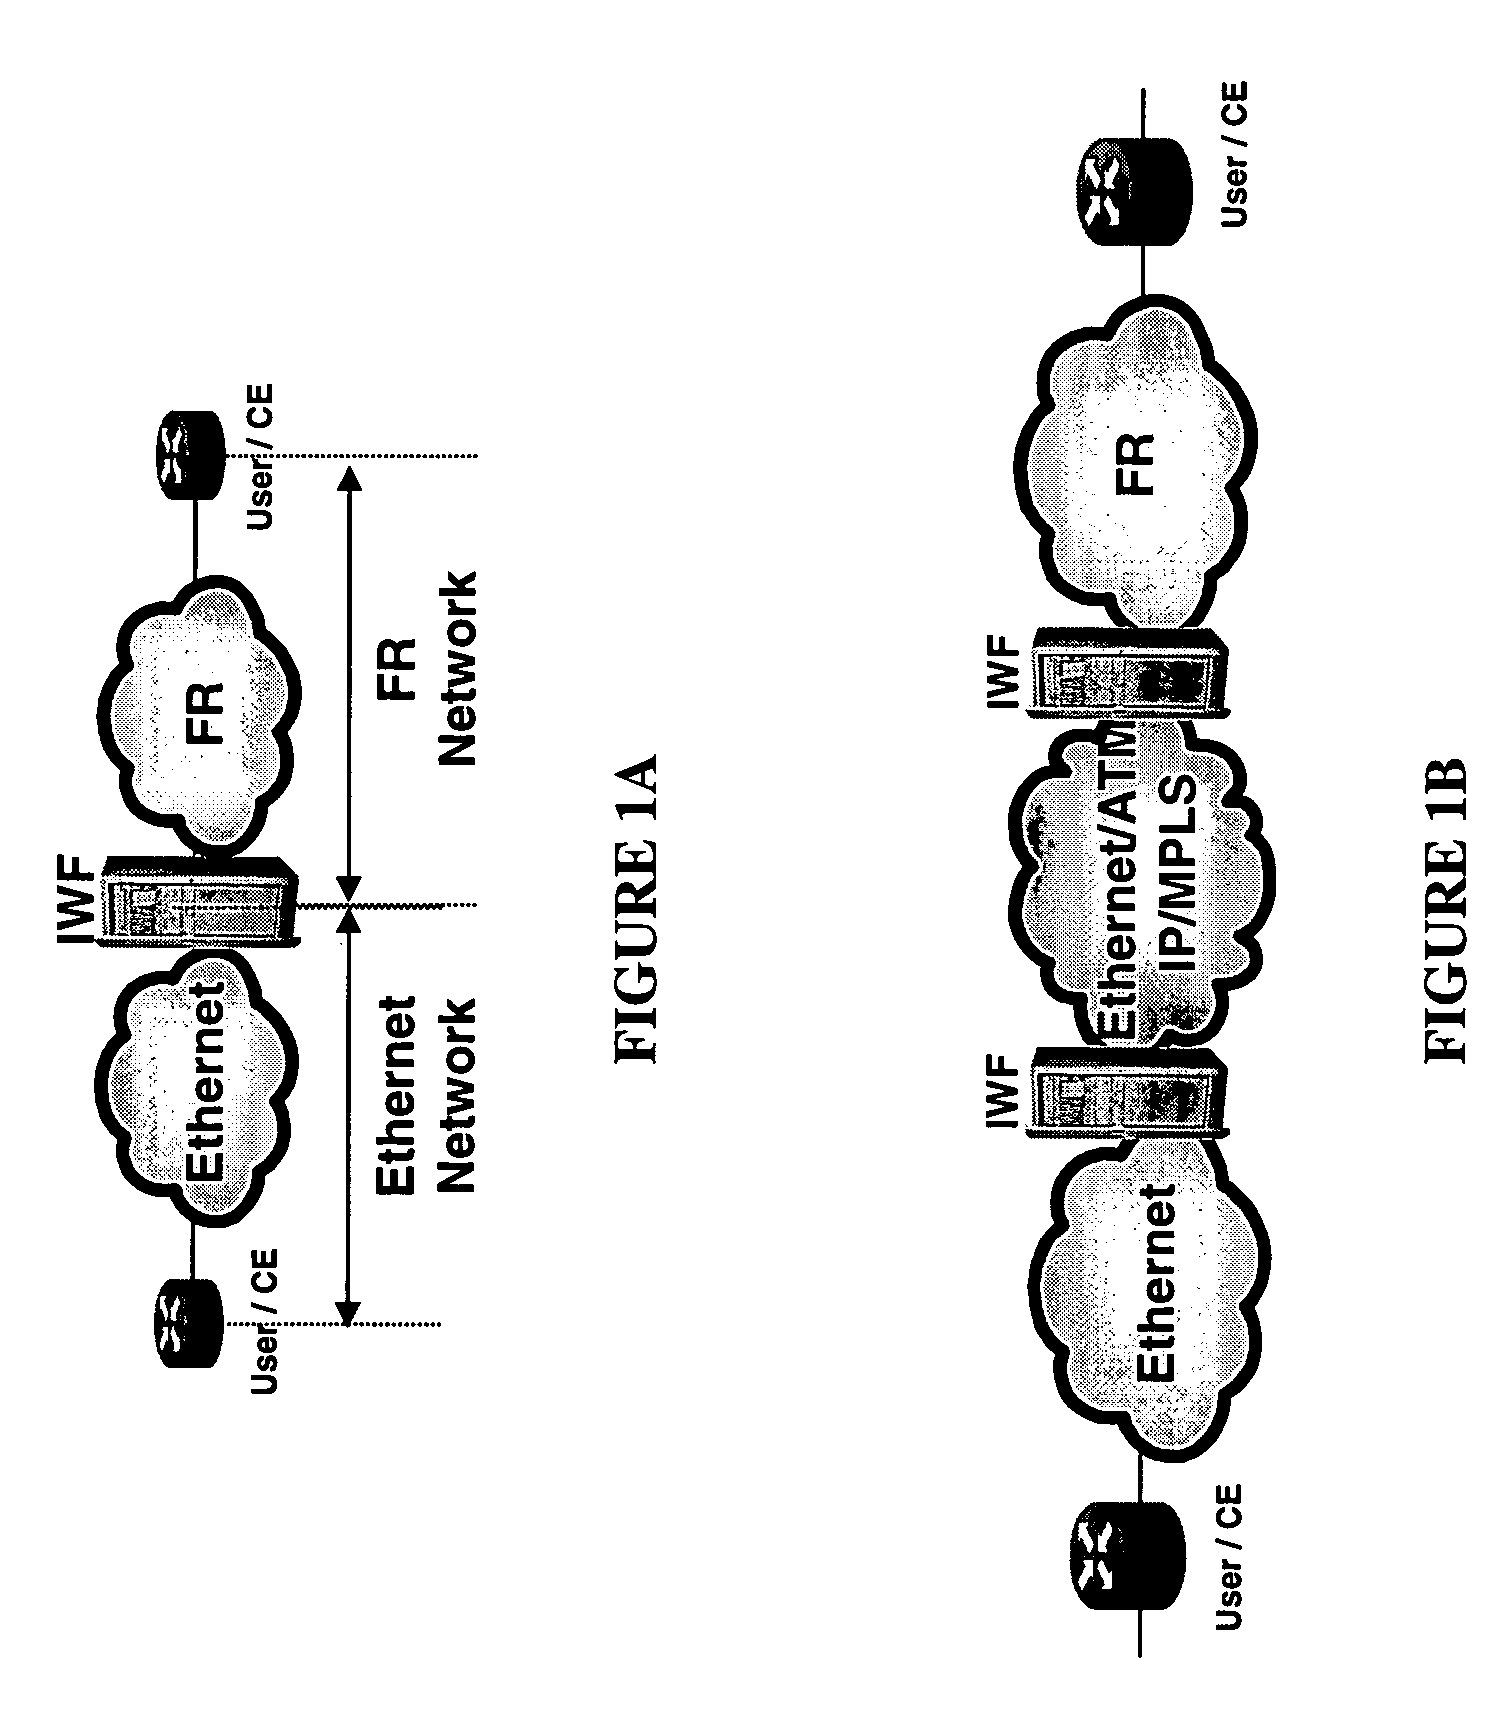 Ethernet to frame relay interworking with multiple quality of service levels